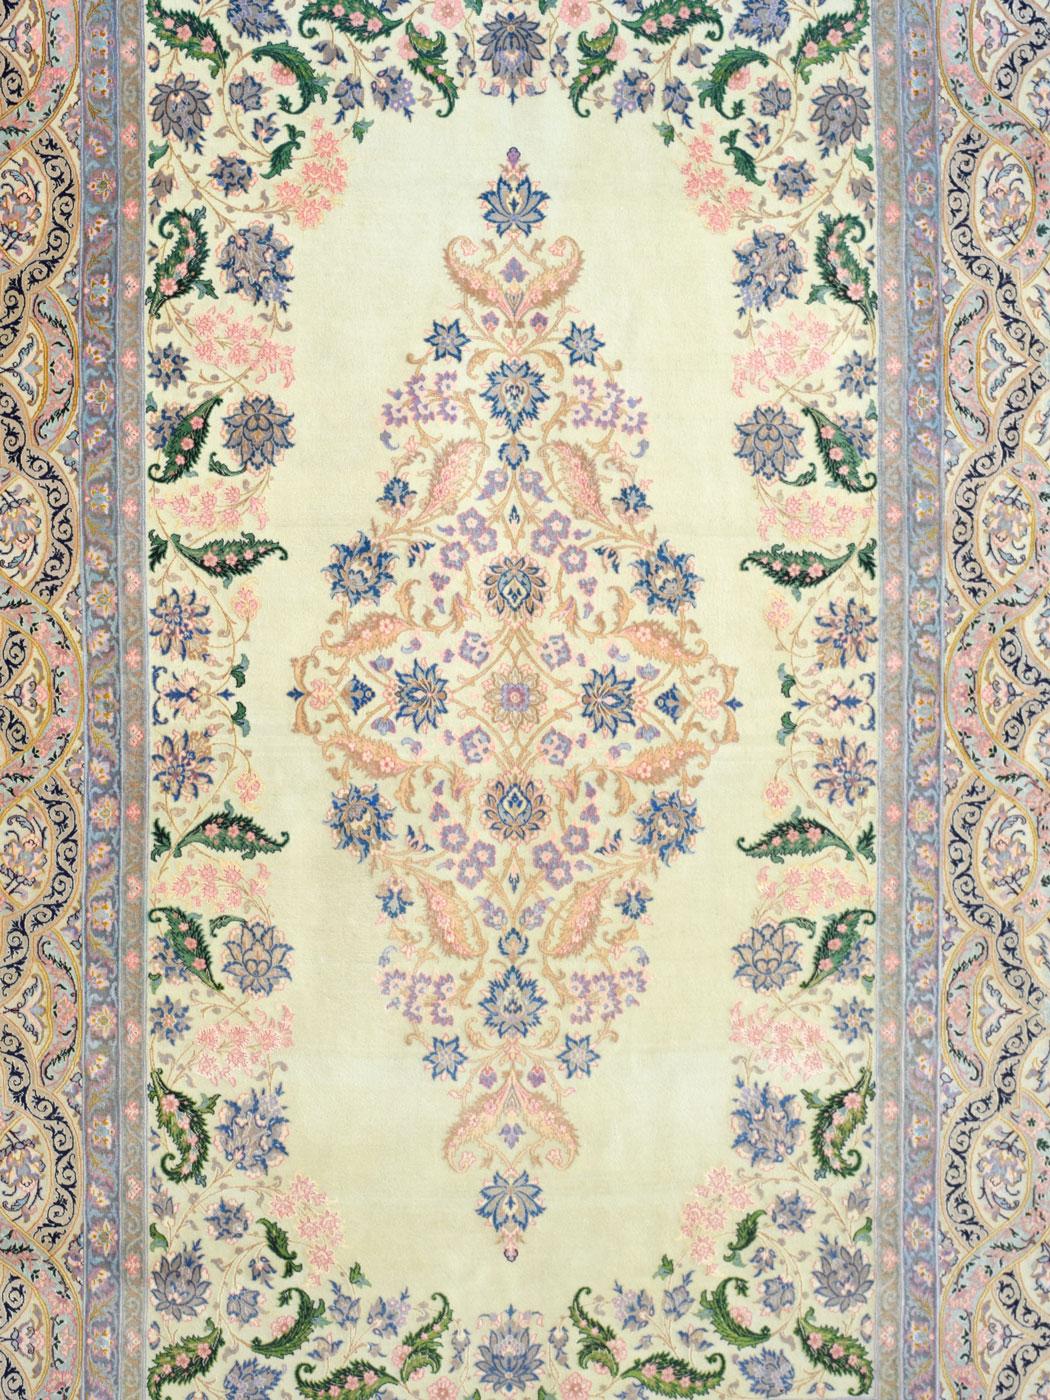 Measuring 5’ x 7’3”, this ornate Persian Isfahan carpet features a hand-knotted weave and complex border in pinks, purples, and greens. Illustrating a classic Isfahan Garden scene, this carpet features a large central medallion detailed by